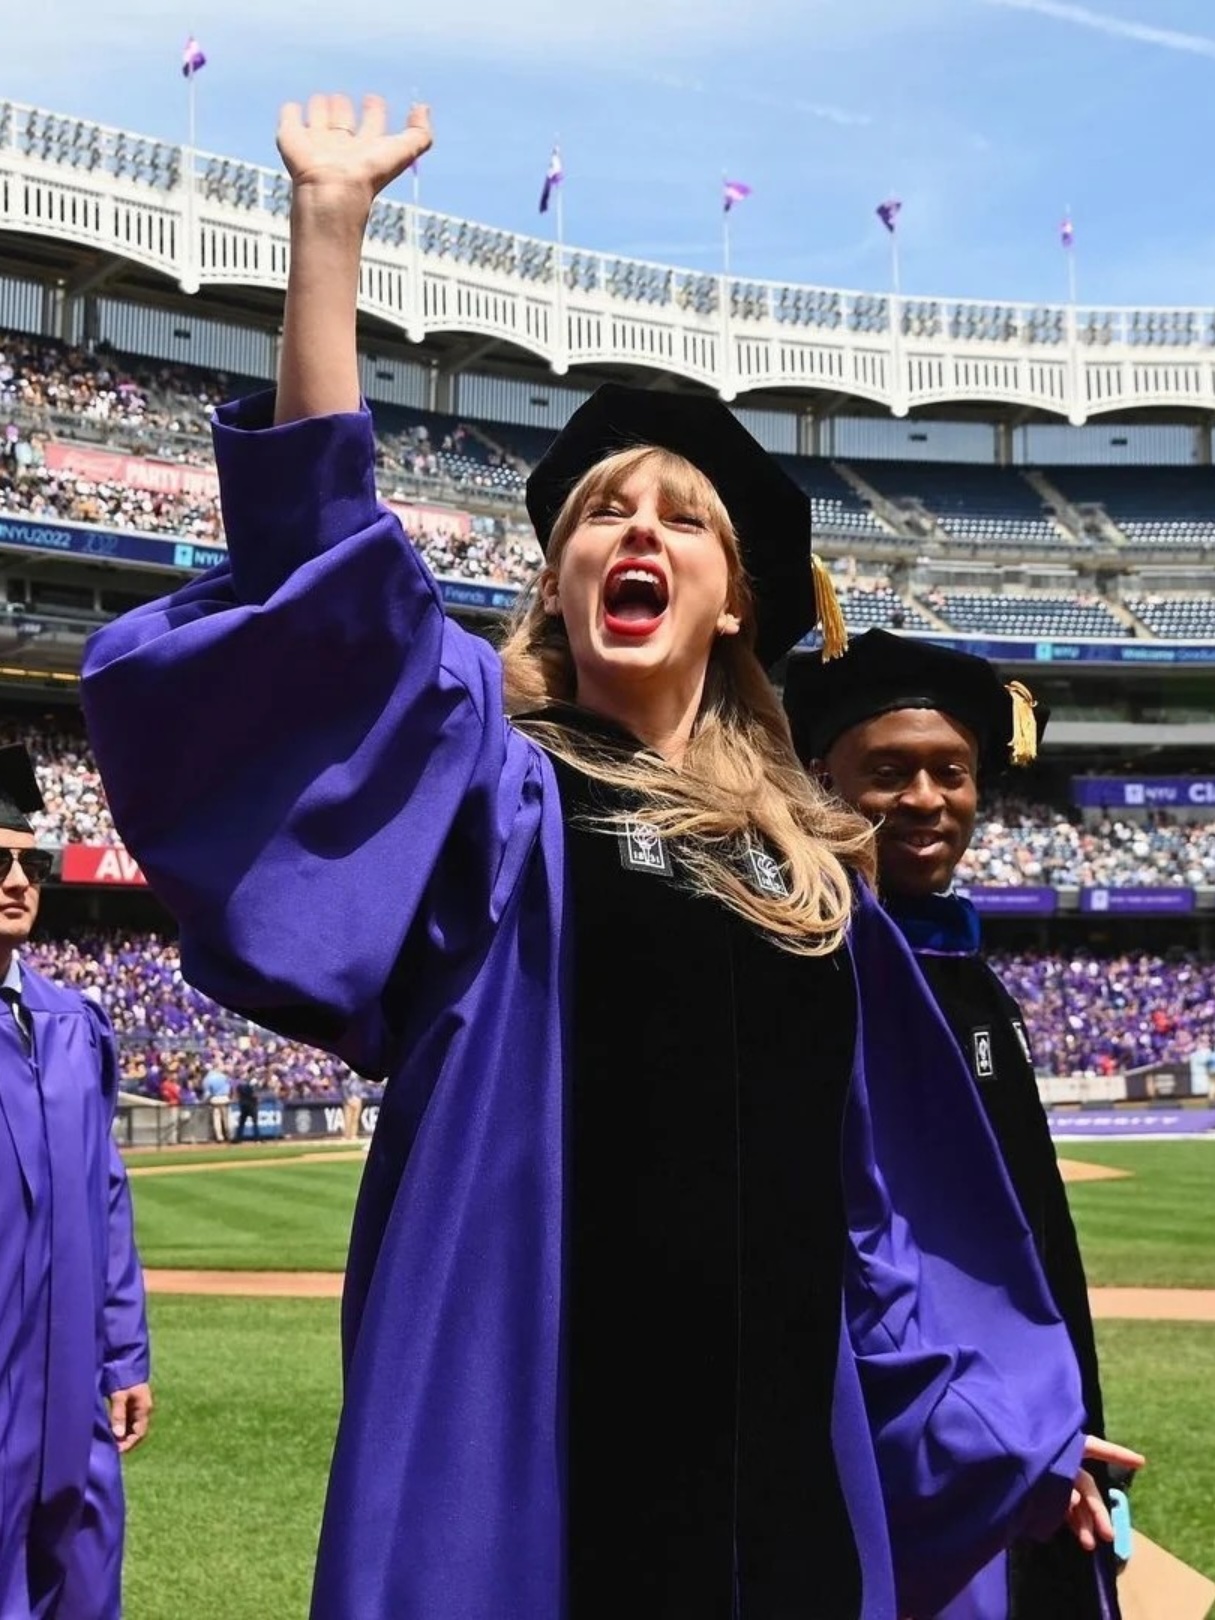 Taylor Swift received doctor degree from NYU